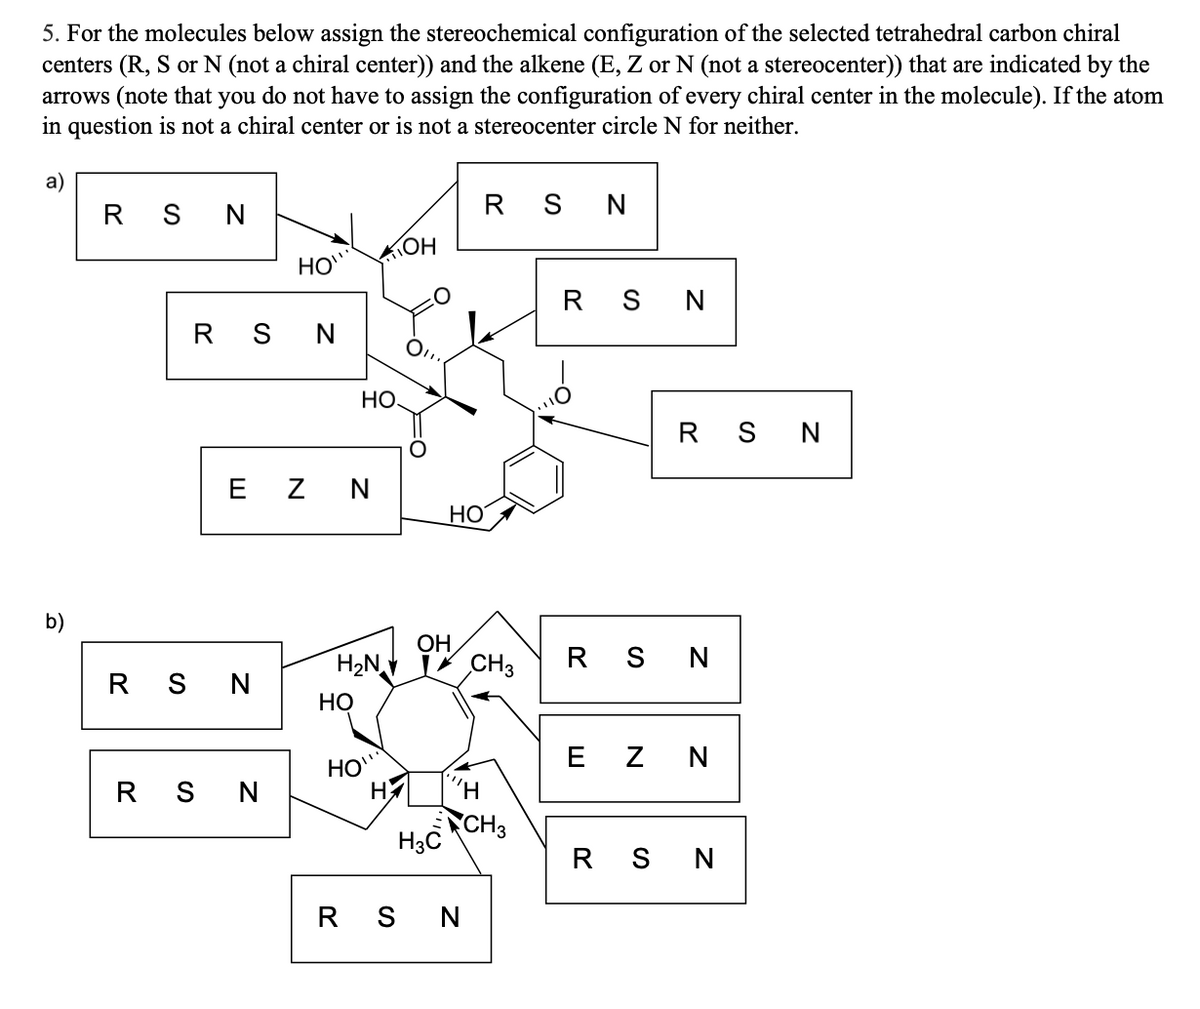 5. For the molecules below assign the stereochemical configuration of the selected tetrahedral carbon chiral
centers (R, S or N (not a chiral center)) and the alkene (E, Z or N (not a stereocenter)) that are indicated by the
arrows (note that you do not have to assign the configuration of every chiral center in the molecule). If the atom
in question is not a chiral center or is not a stereocenter circle N for neither.
b)
RSN
RSN
HO"
RSN
EZ N
RSN
НО.
H₂N
HO
HO
OH
HO
OH
RSN
RSN
CH3
НИ
H3 CH₂
RSN
RSN
RSN
EZ N
RSN